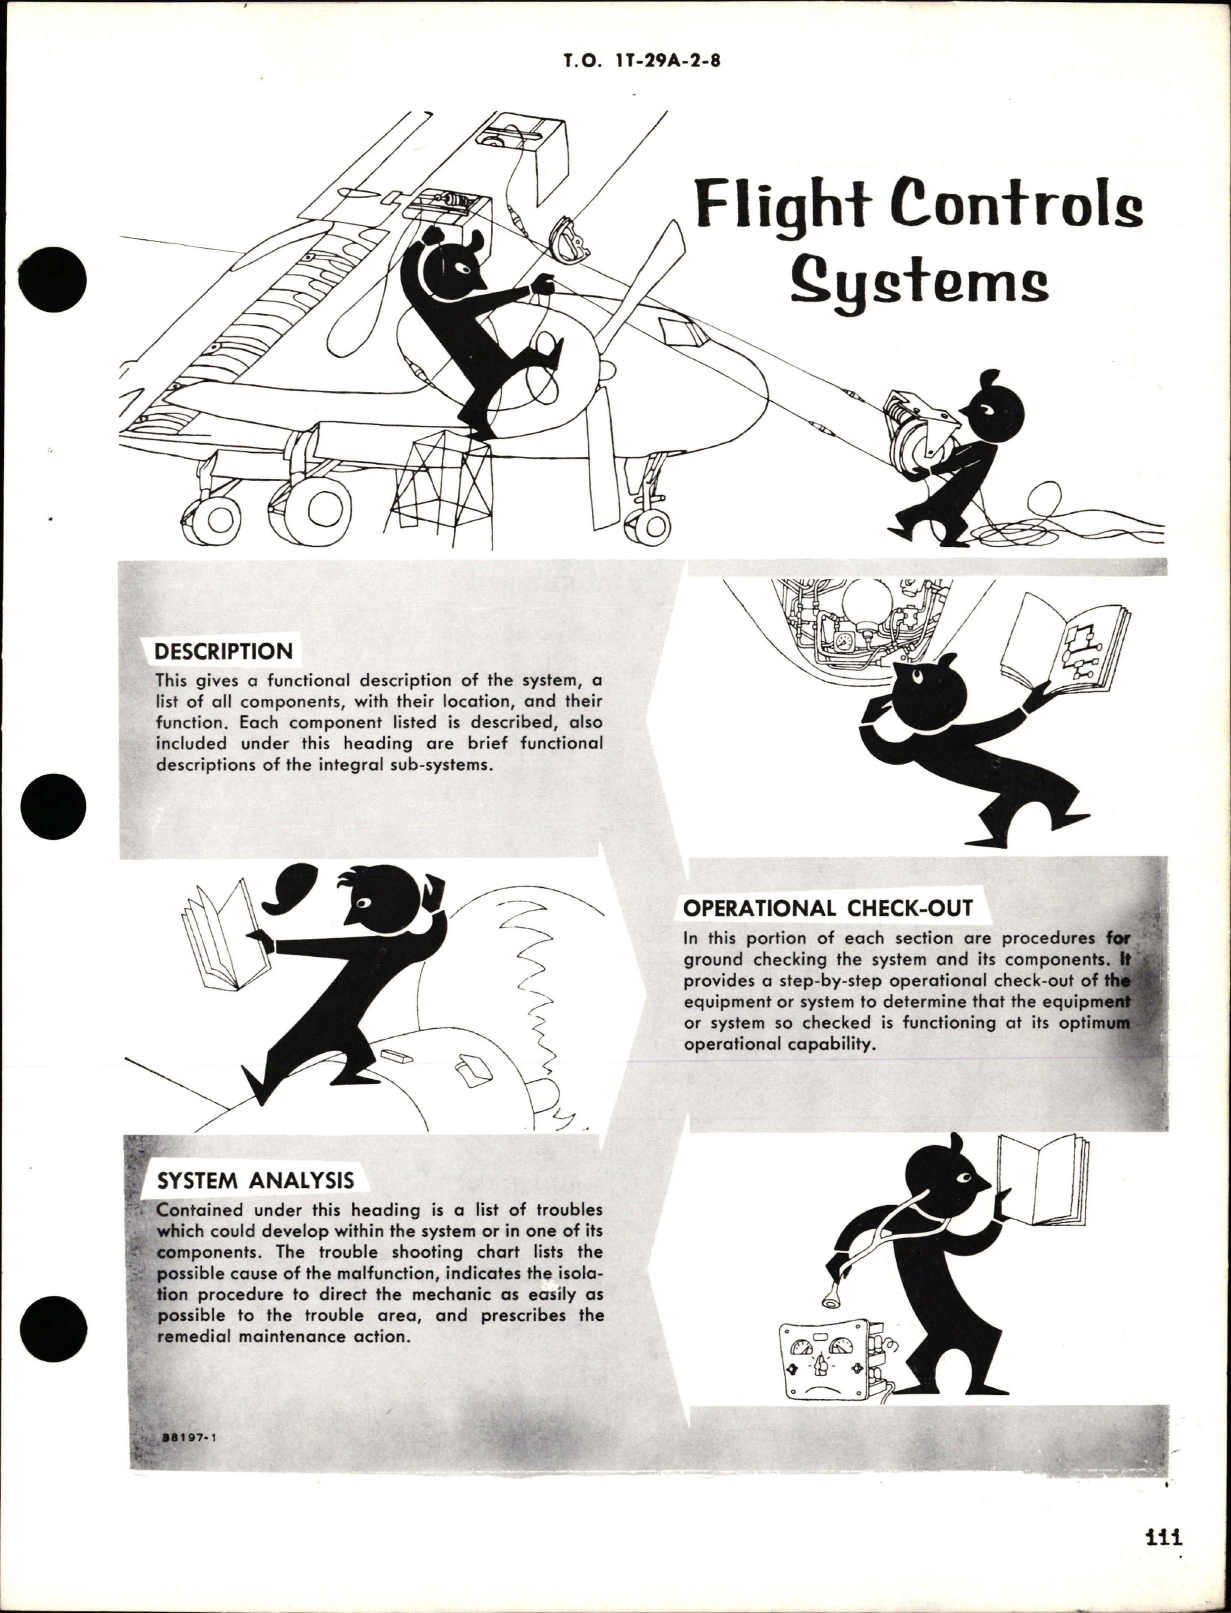 Sample page 5 from AirCorps Library document: Maintenance Manual for Flight Control Systems - T-29A, T-29B, T-29C and T-29D